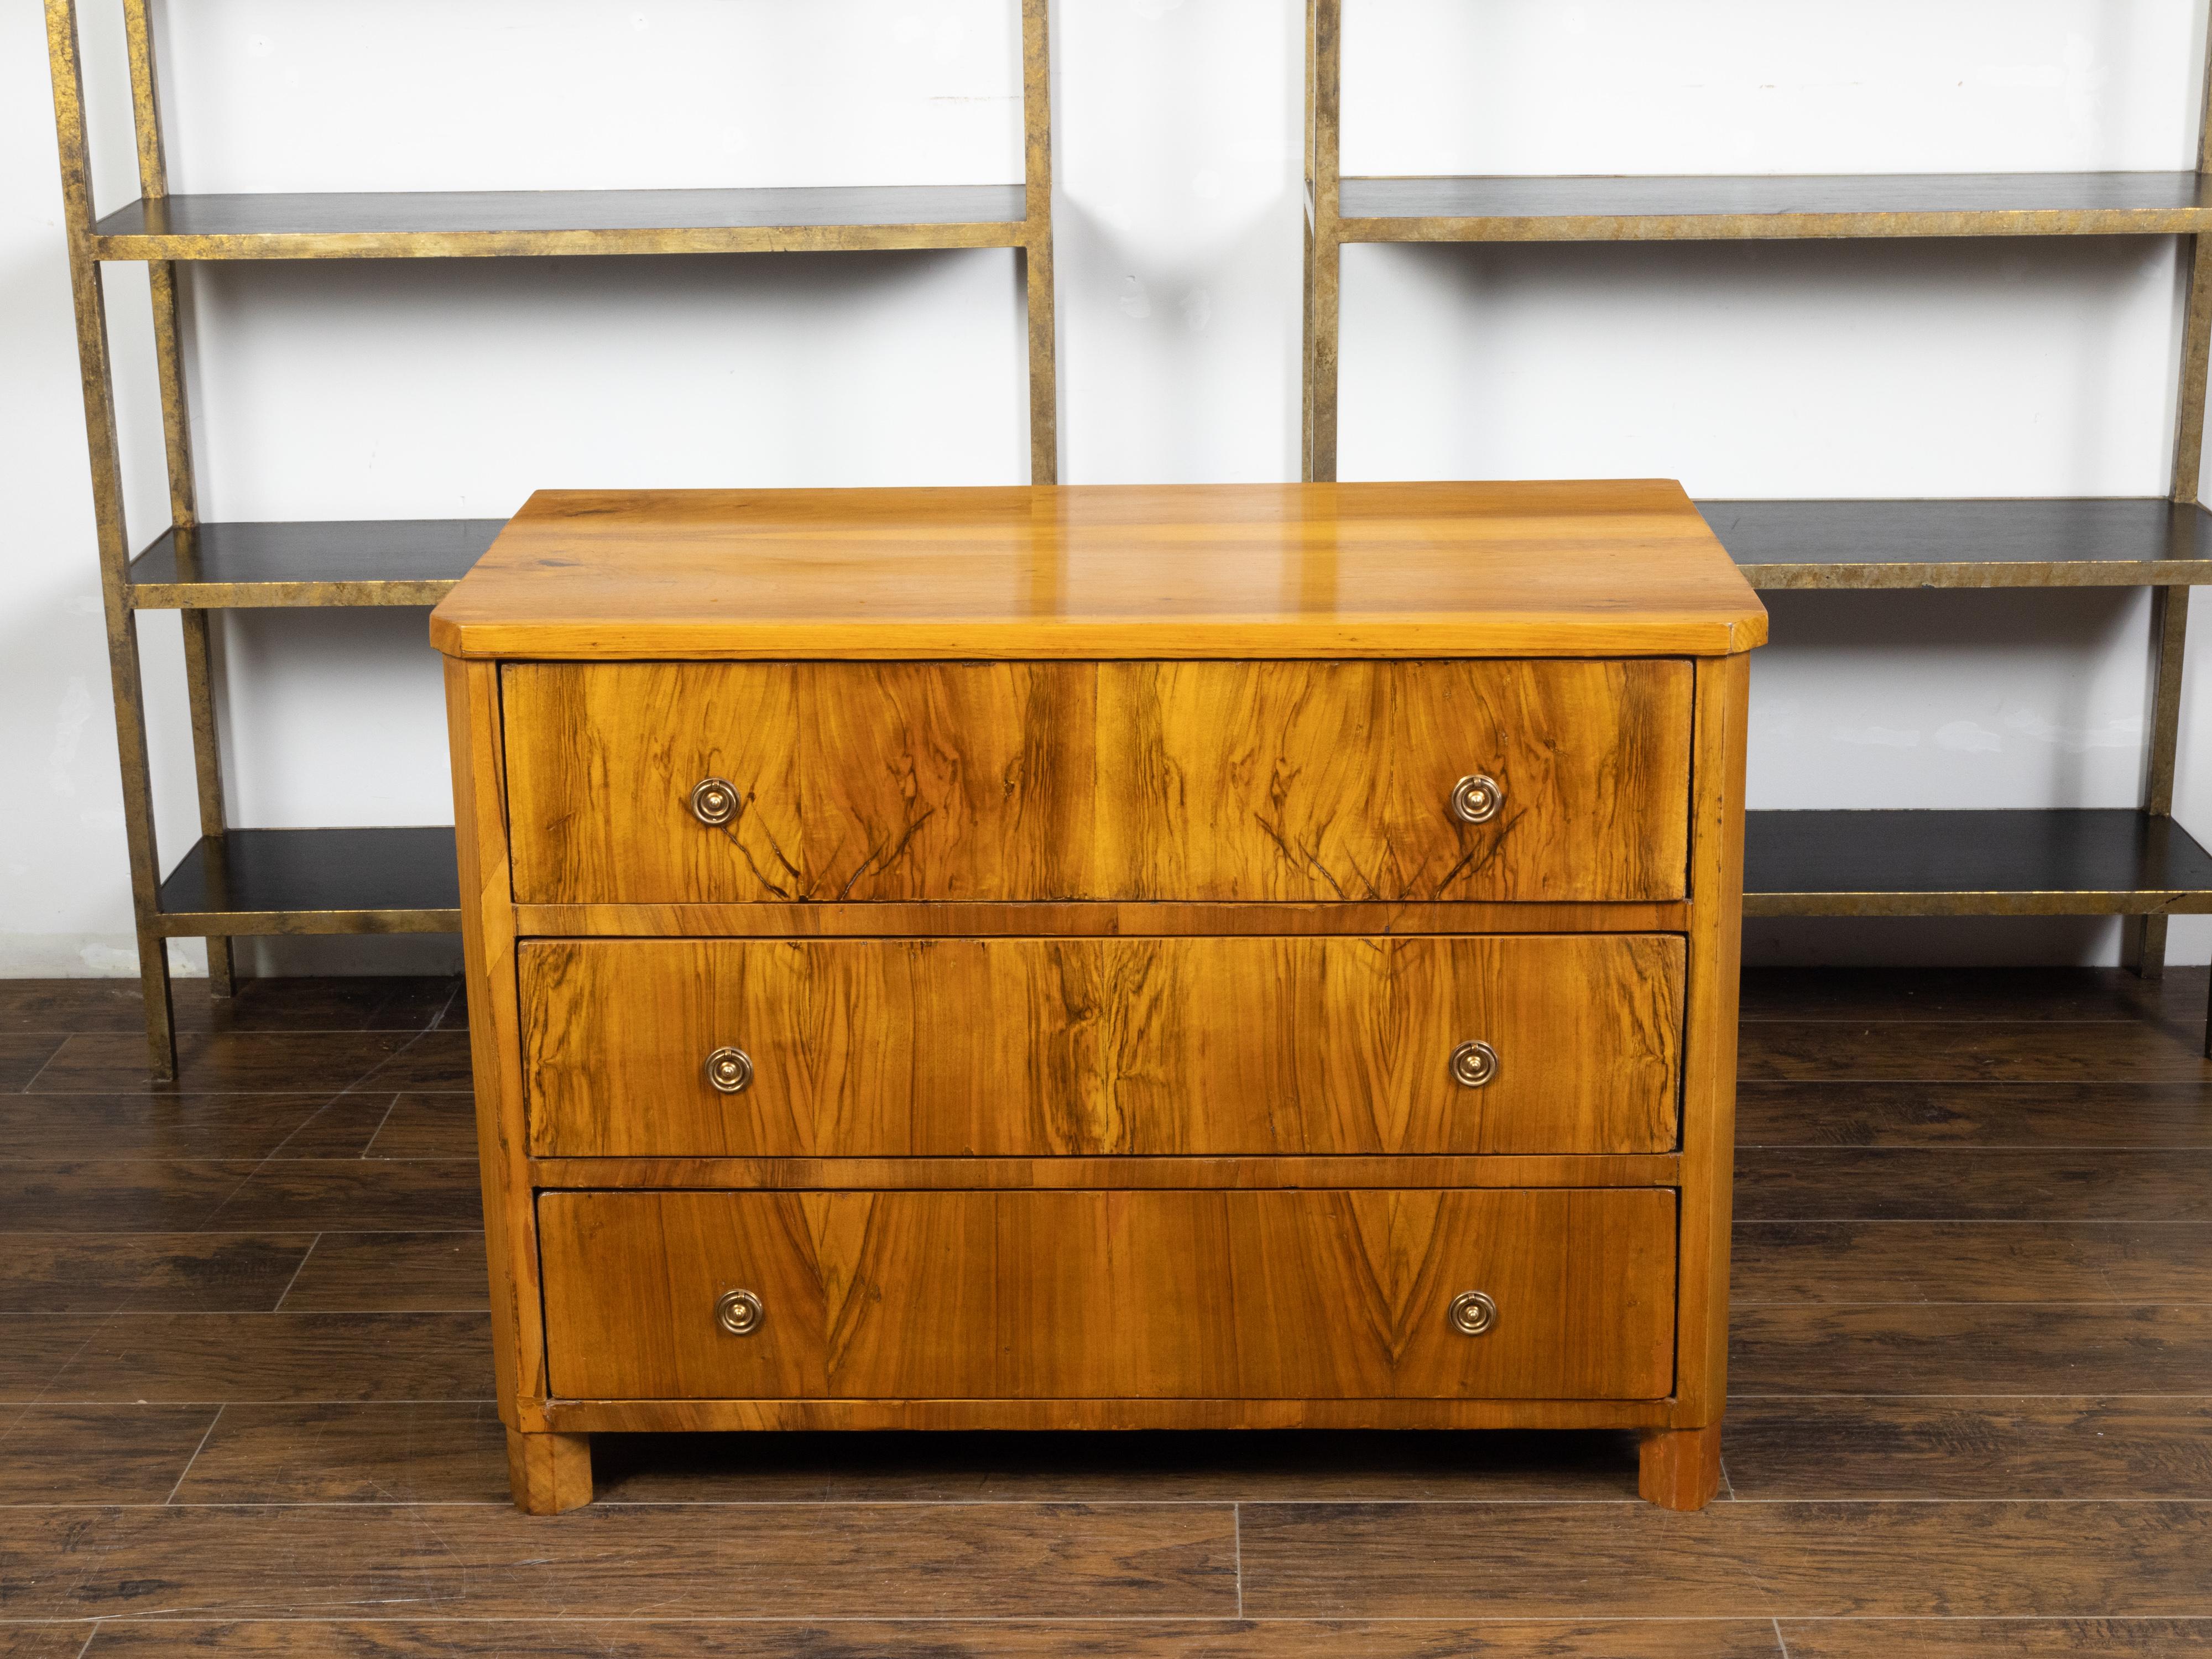 An Austrian Biedermeier commode from the 19th century, with three drawers and block feet. Created in Austria during the 19th century, this Biedermeier commode features a rectangular top with canted corners in the front, sitting above three butterfly